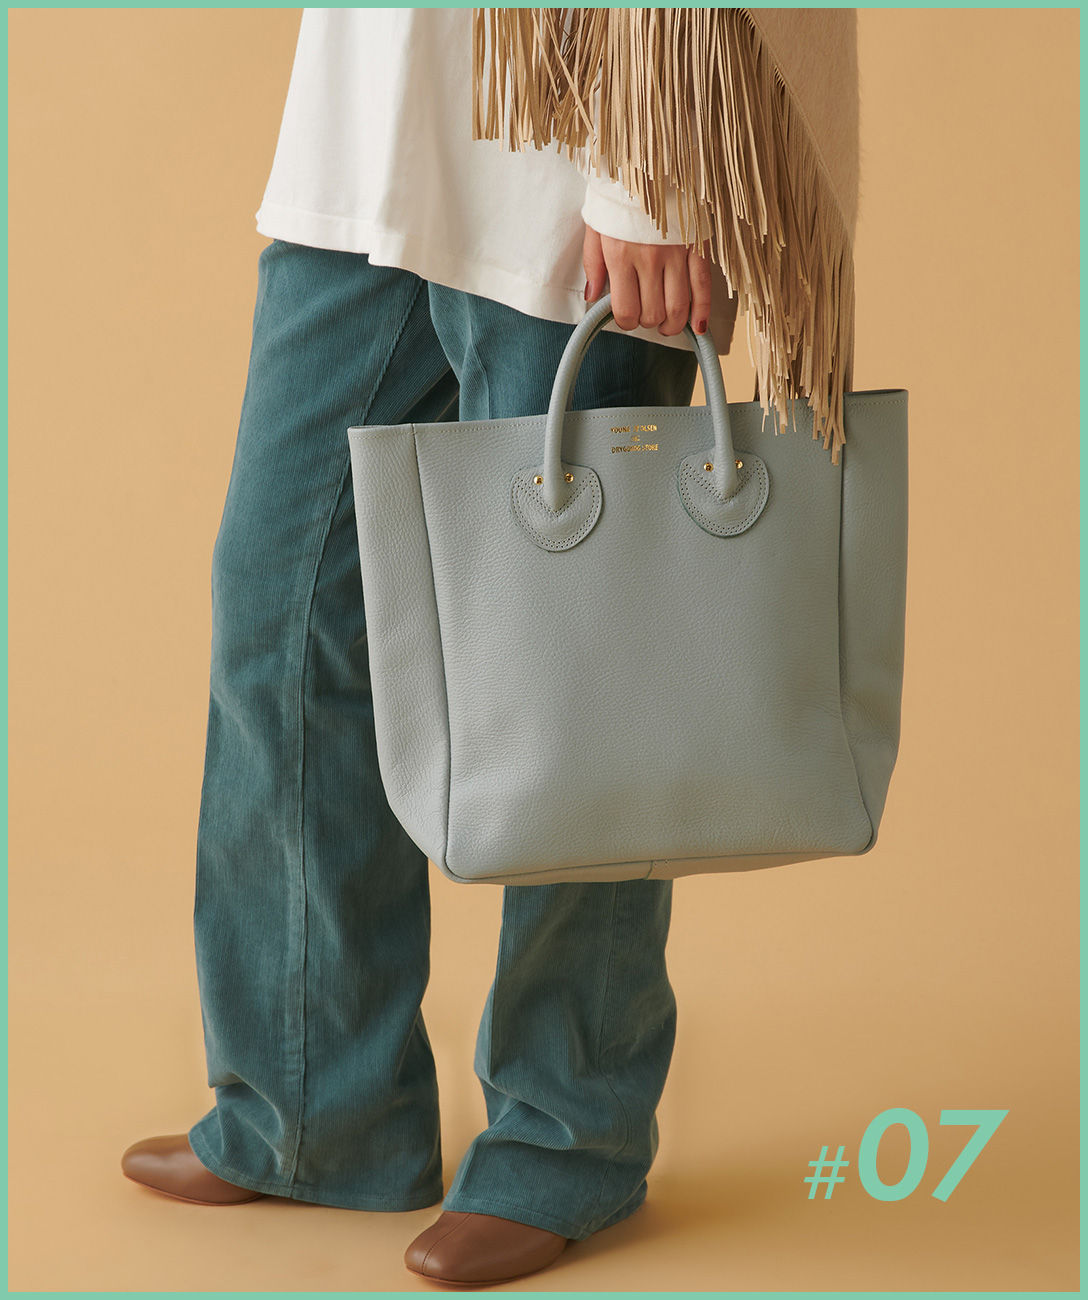 YOUNG & OLSEN The DRYGOODS STORE レザートートバッグ M